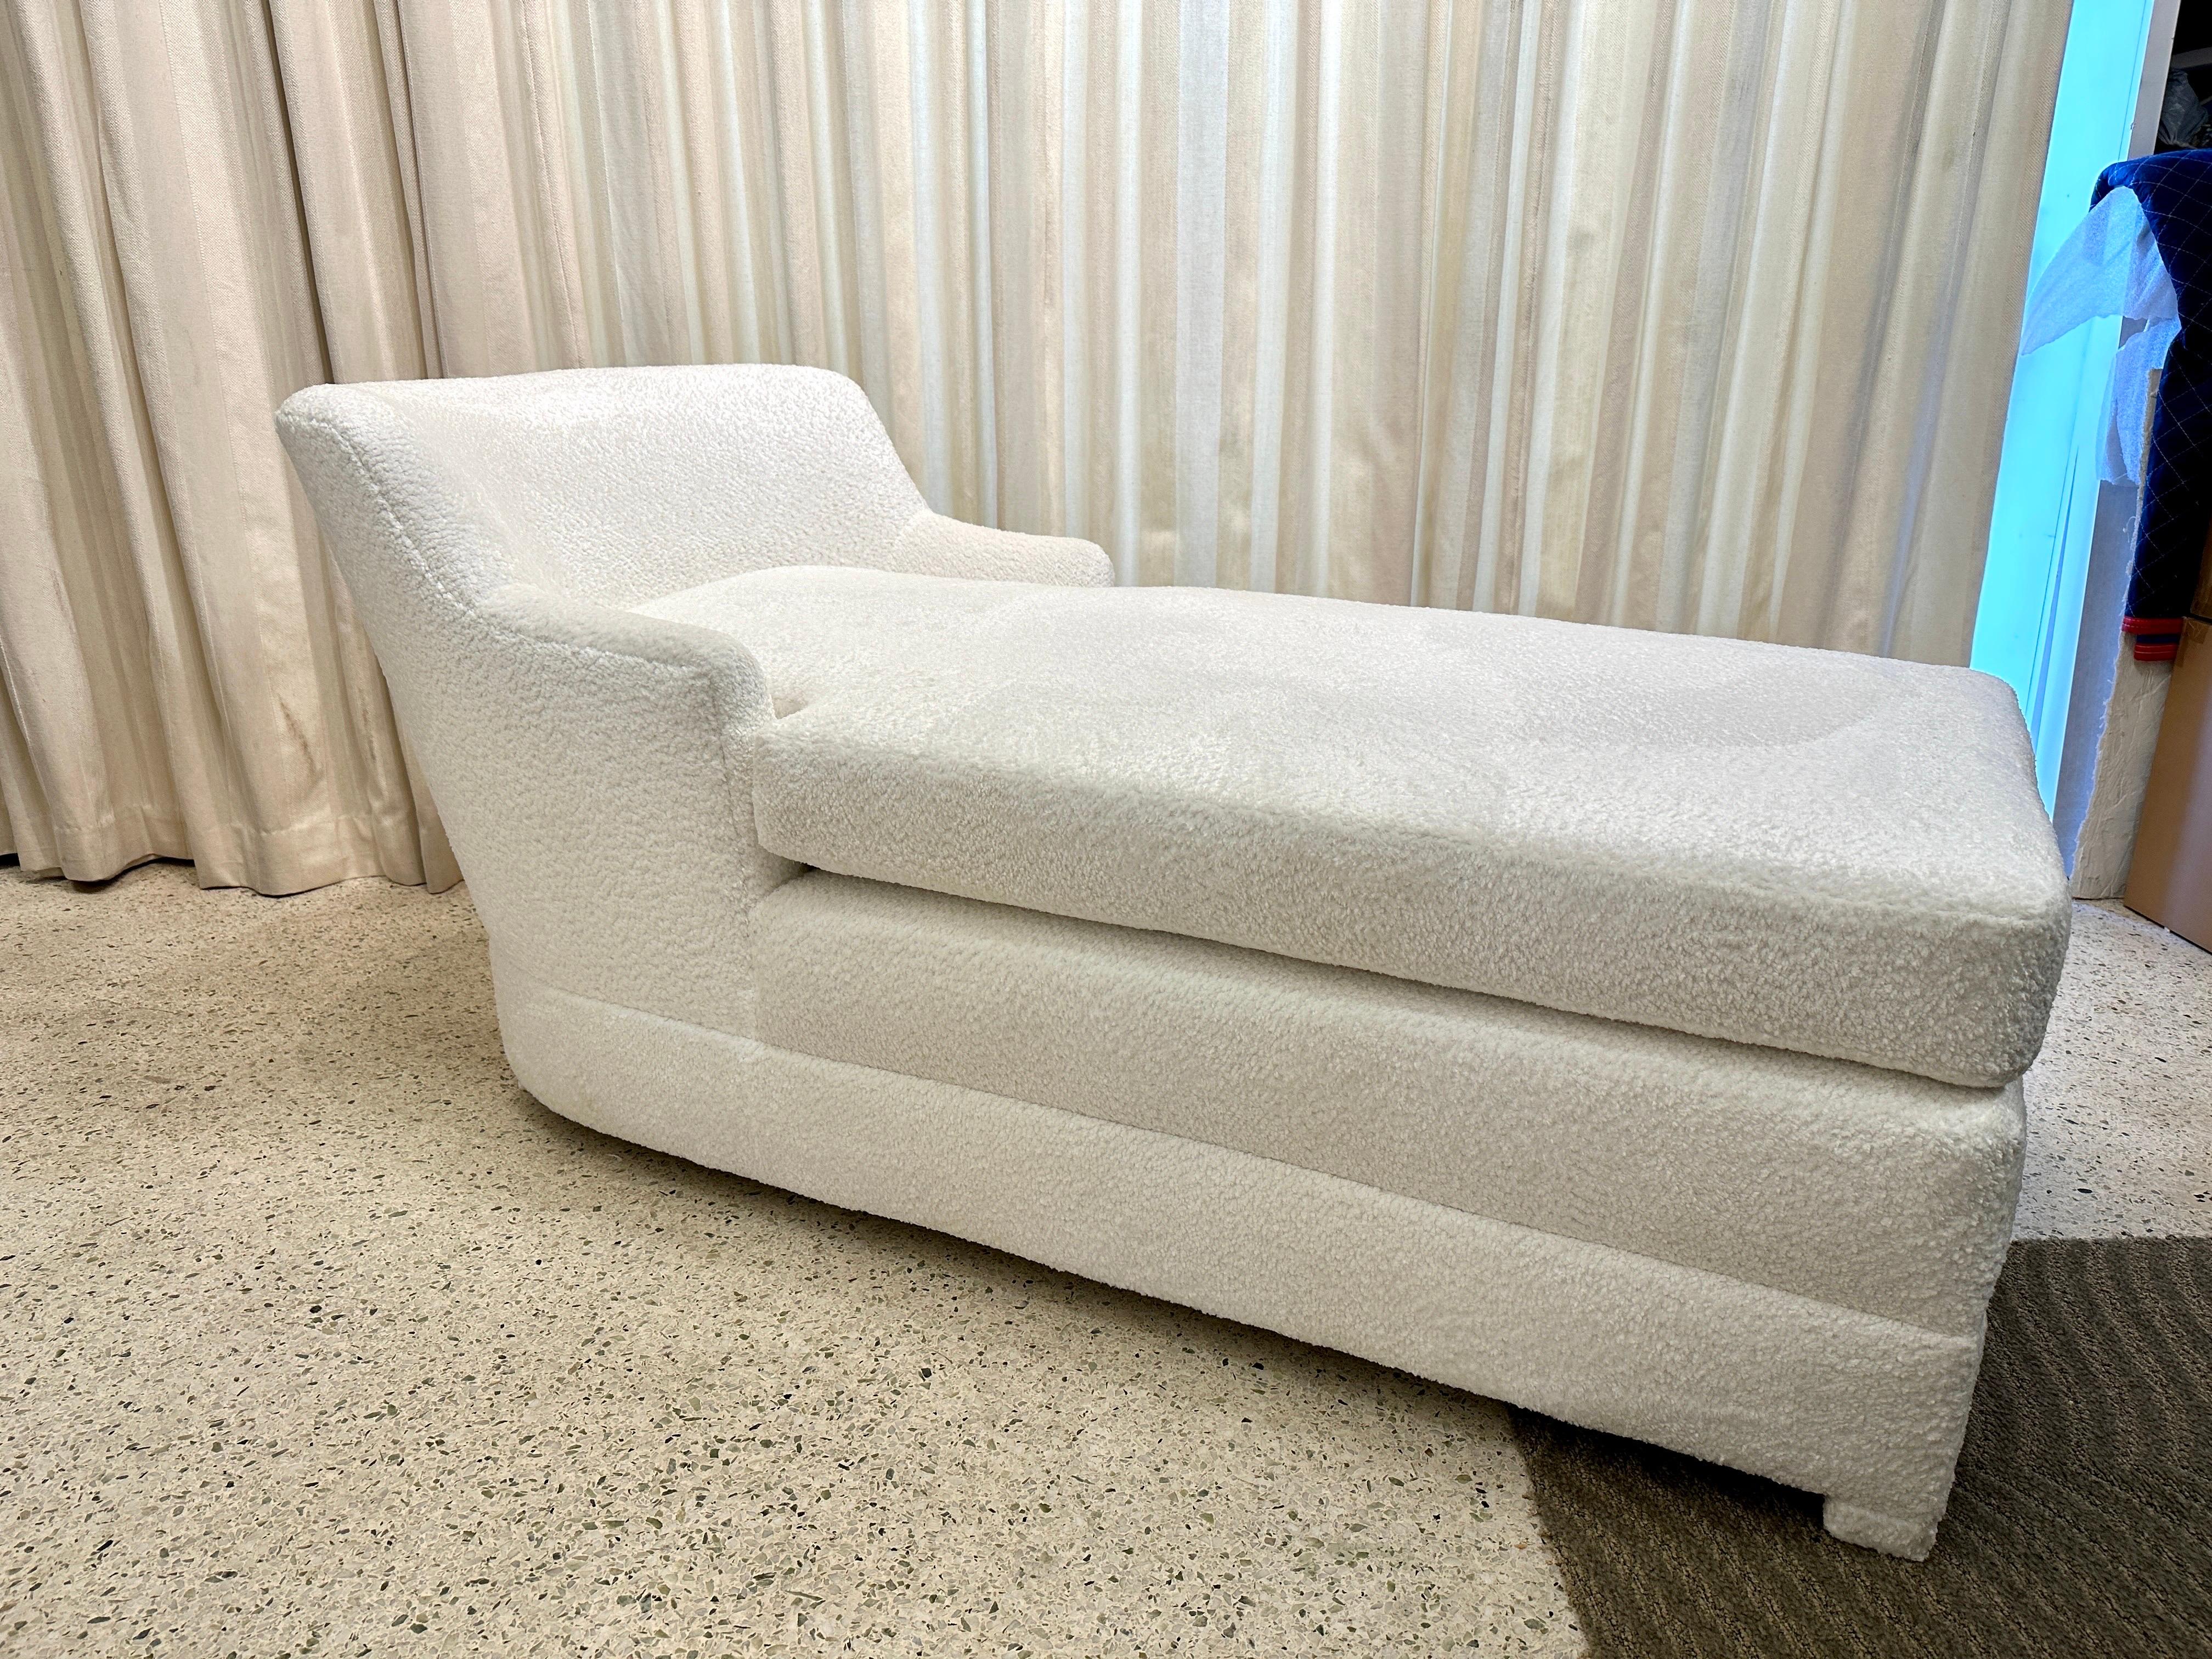 Luxury and comfort is what this newly upholstered chaise longue in Boucle will offer.  Completely clad in fabric, even the feet, this is a great way to add elegance and extra seating to any space.  THIS ITEM IS LOCATED AND WILL SHIP FROM OUR MIAMI,